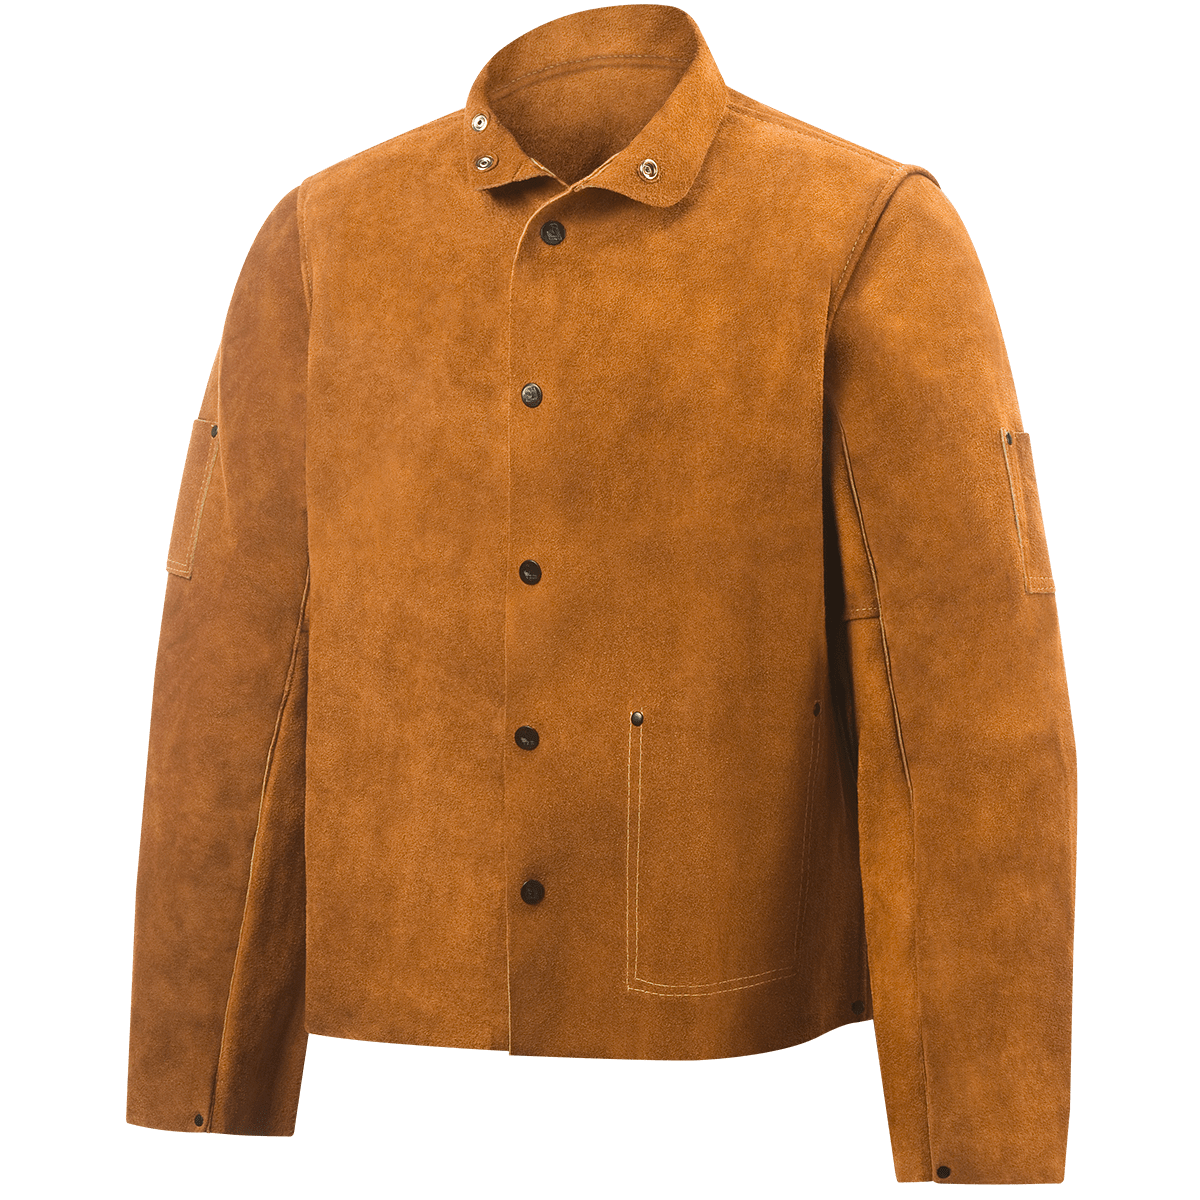 The Invicto Brown Suede Cowhide Welder Jacket is a premium protective garment designed for welders and industrial workers. Shop for this high-quality jacket at Supply Master Ghana, Accra, and experience exceptional comfort, durability, and safety. Safety Clothing Buy Tools hardware Building materials